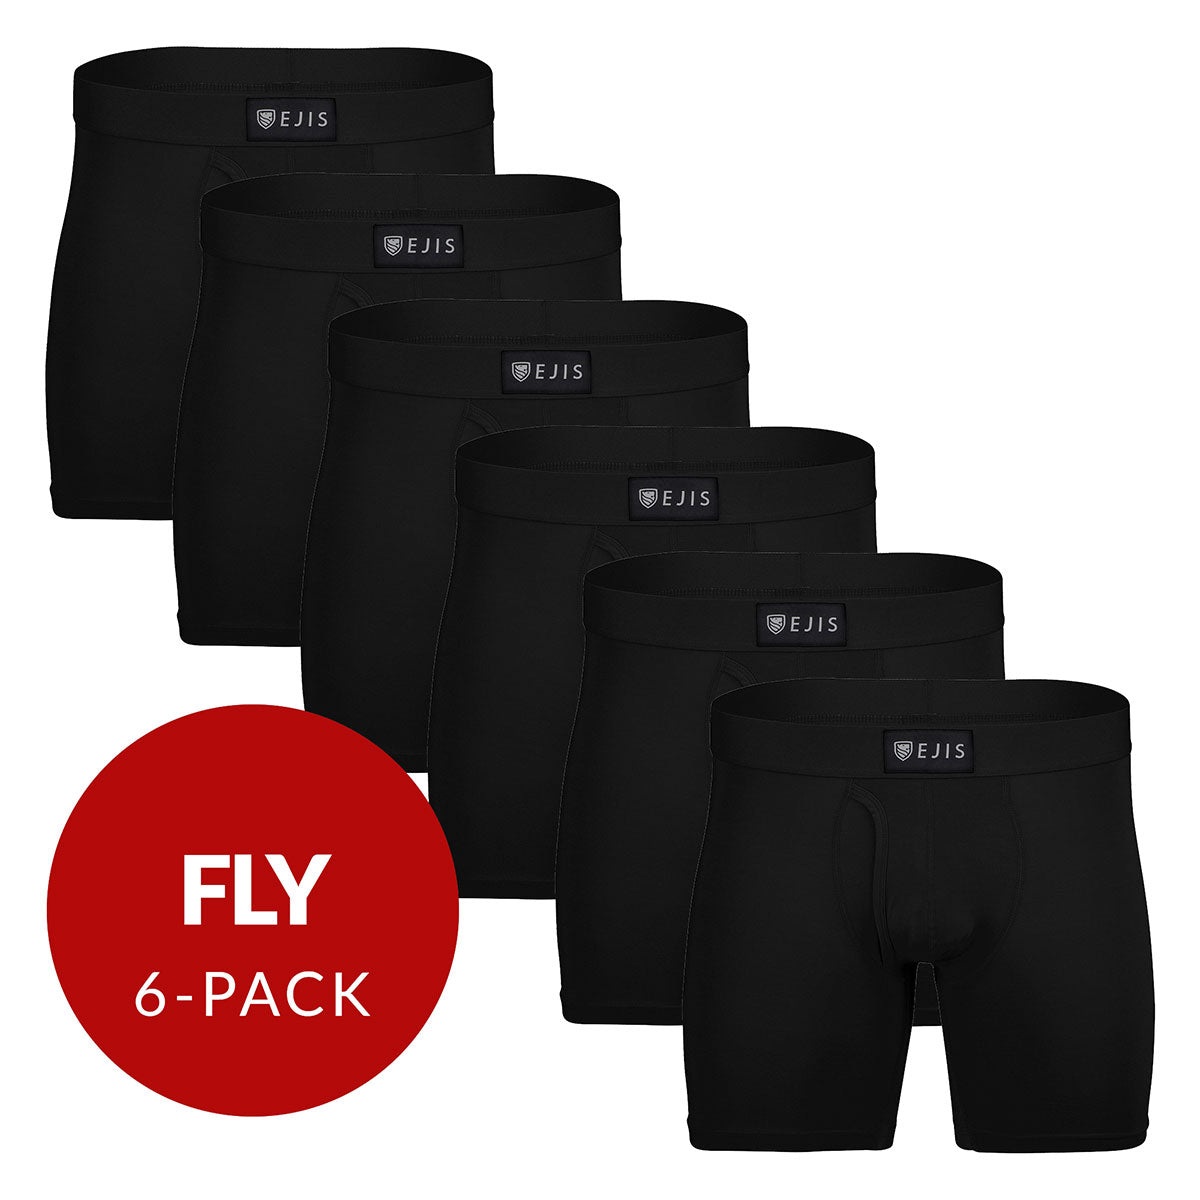 Sweat Proof Men's Boxer Briefs with Fly - Black 6-Pack - Ejis